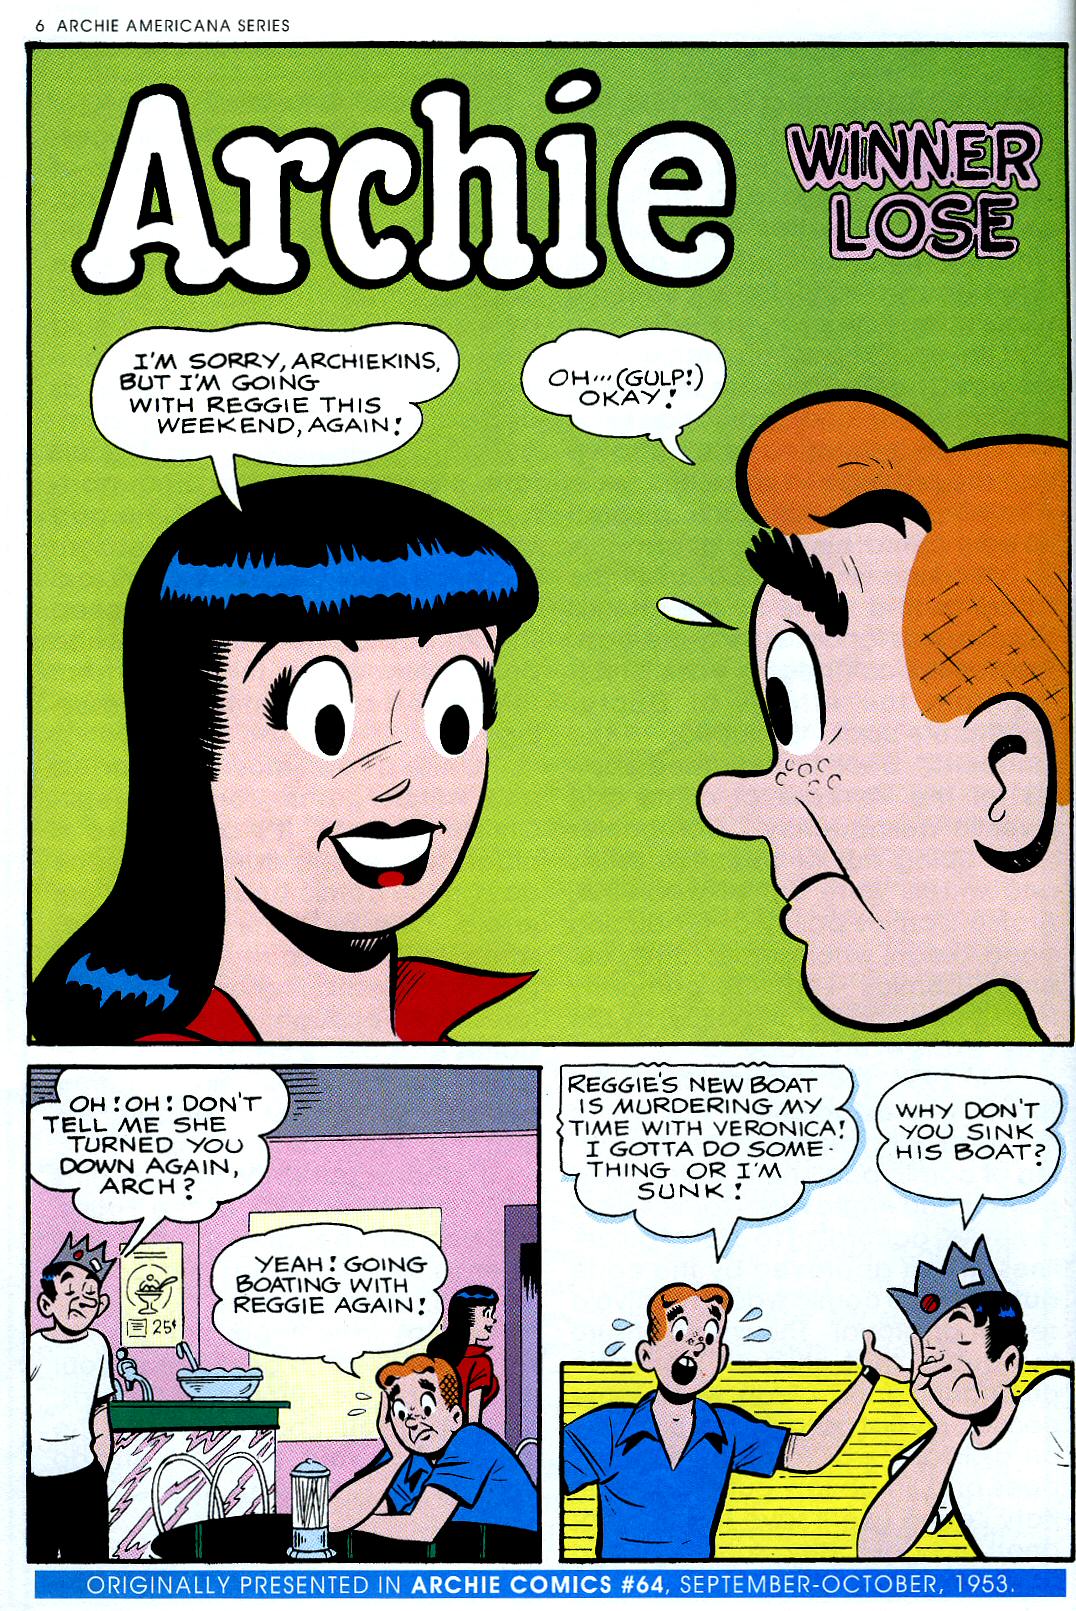 Read online Archie Americana Series comic -  Issue # TPB 2 - 8